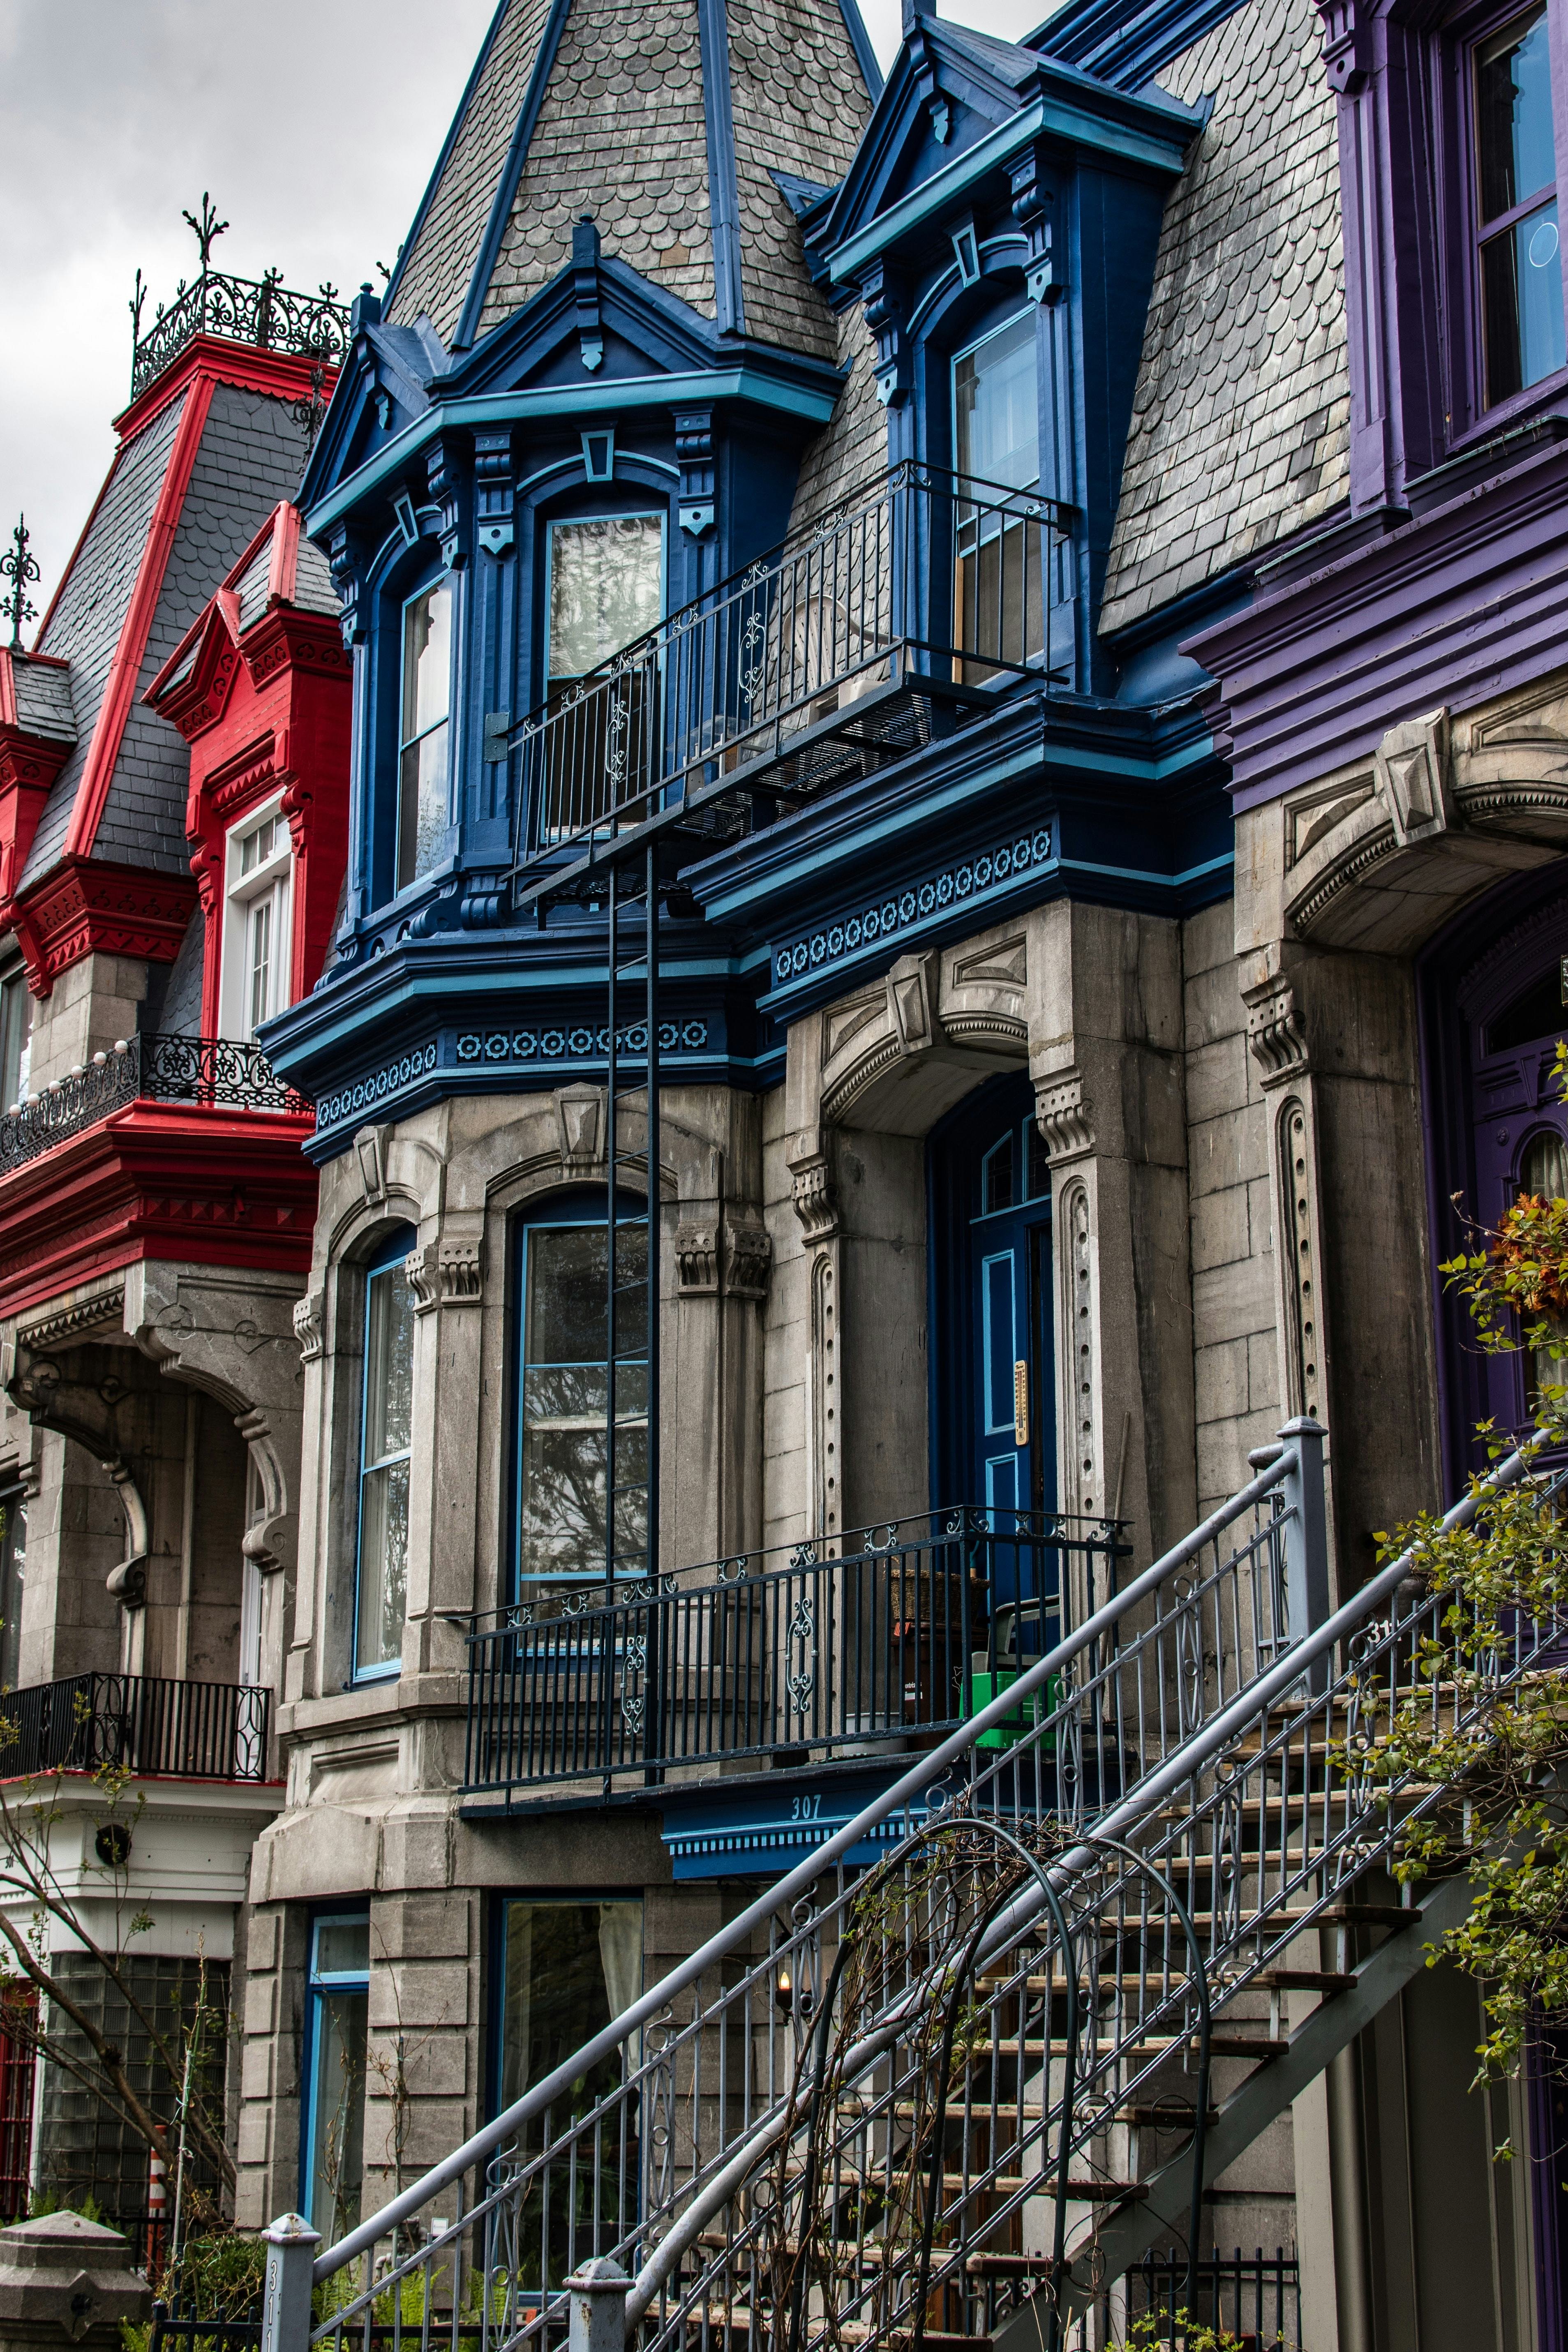 A row of historic homes in Montreal, Canada